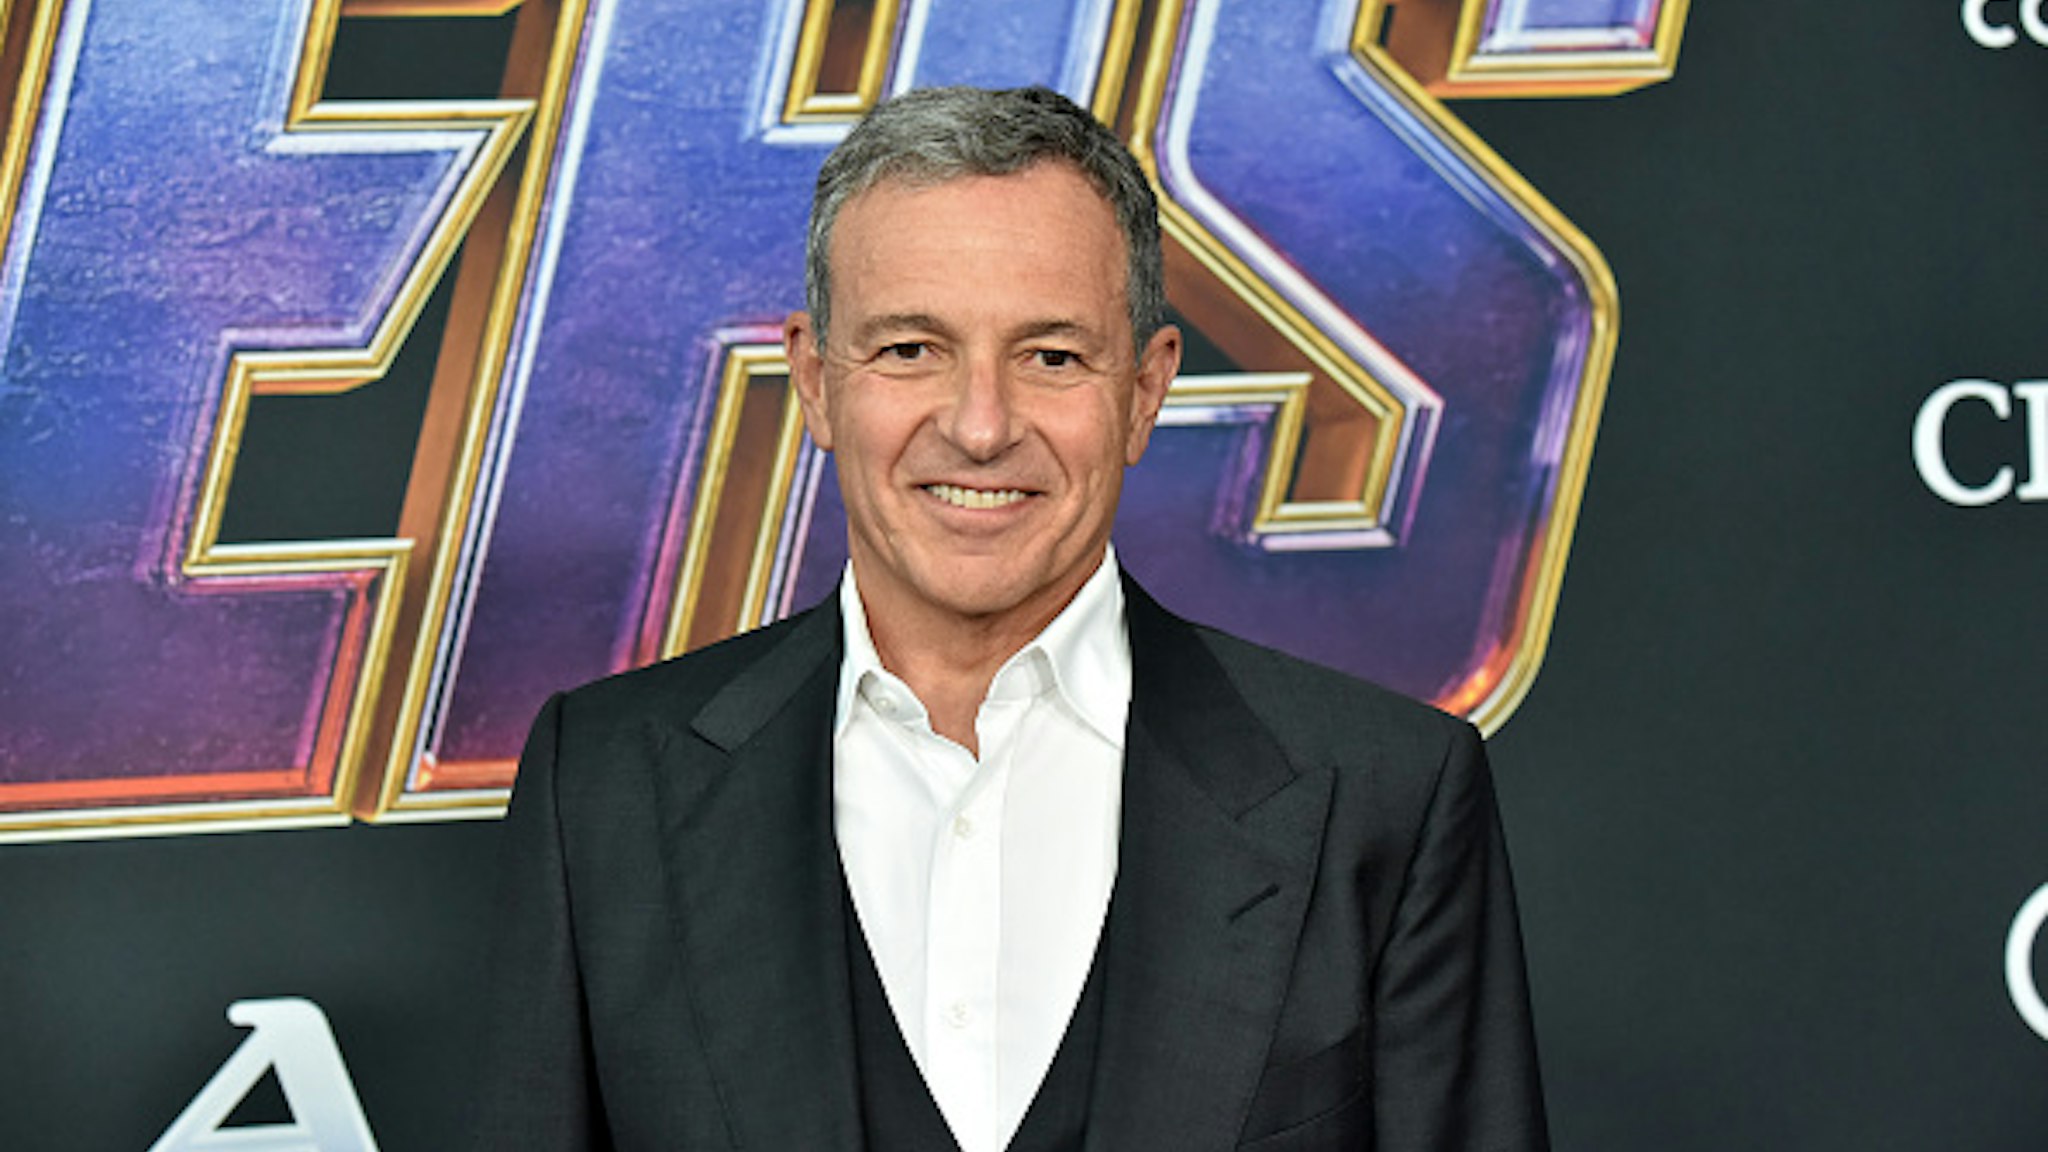 LOS ANGELES, CALIFORNIA - APRIL 22: Bob Iger attends the World Premiere of Walt Disney Studios Motion Pictures "Avengers: Endgame" at Los Angeles Convention Center on April 22, 2019 in Los Angeles, California.